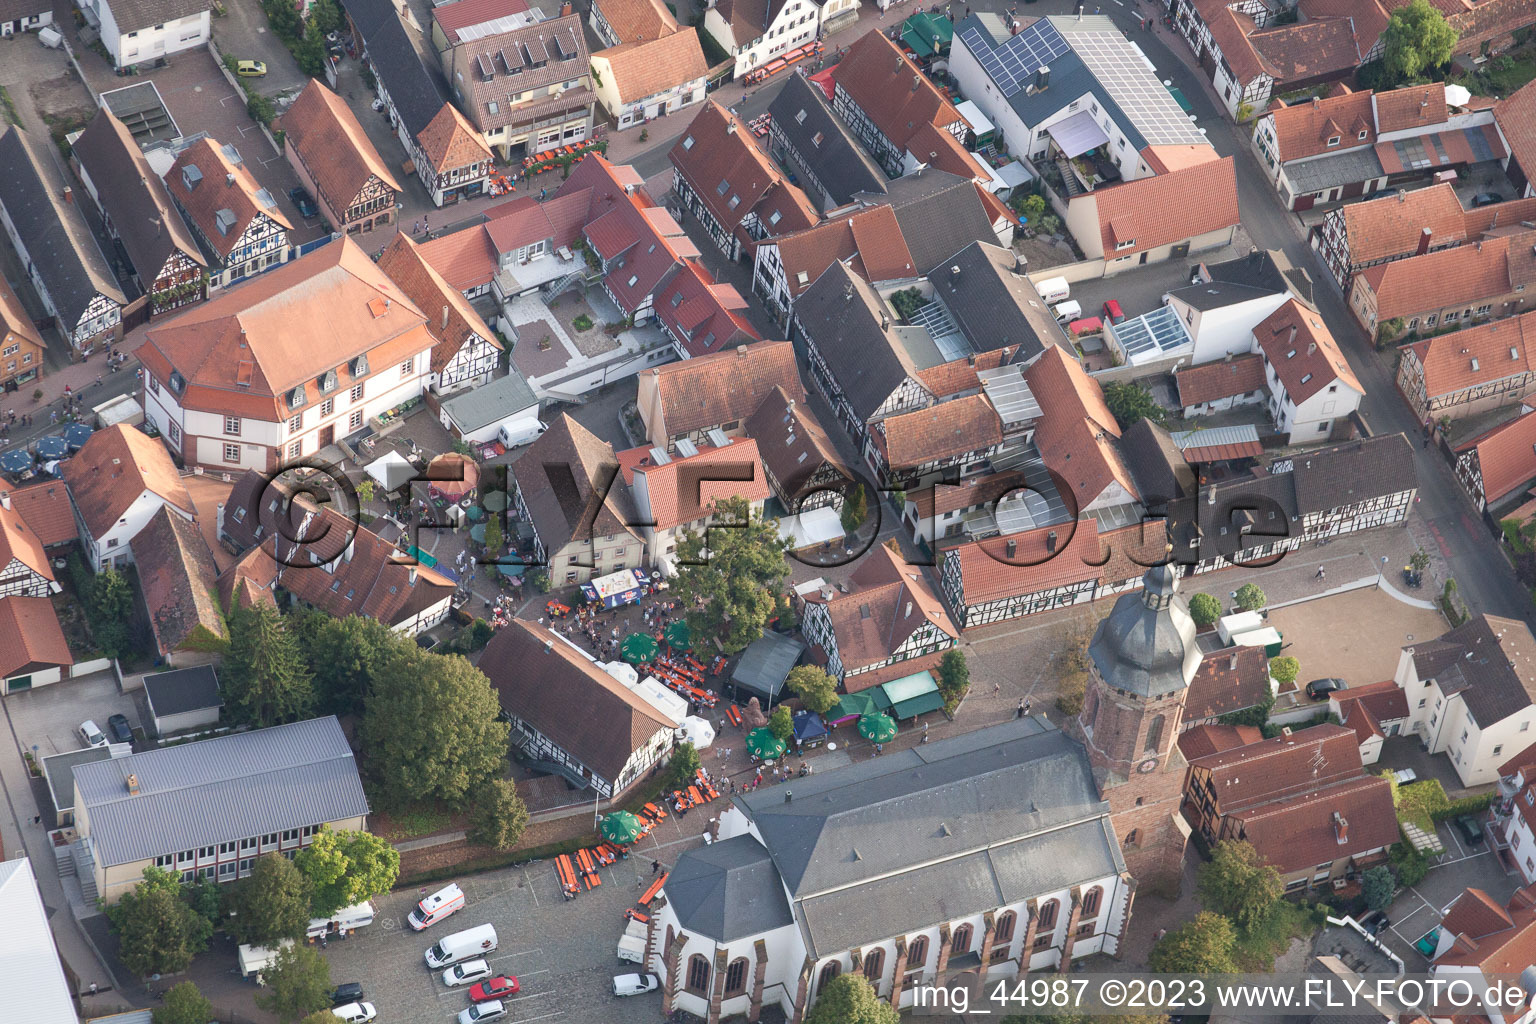 Bird's eye view of City festival 2011 in Kandel in the state Rhineland-Palatinate, Germany